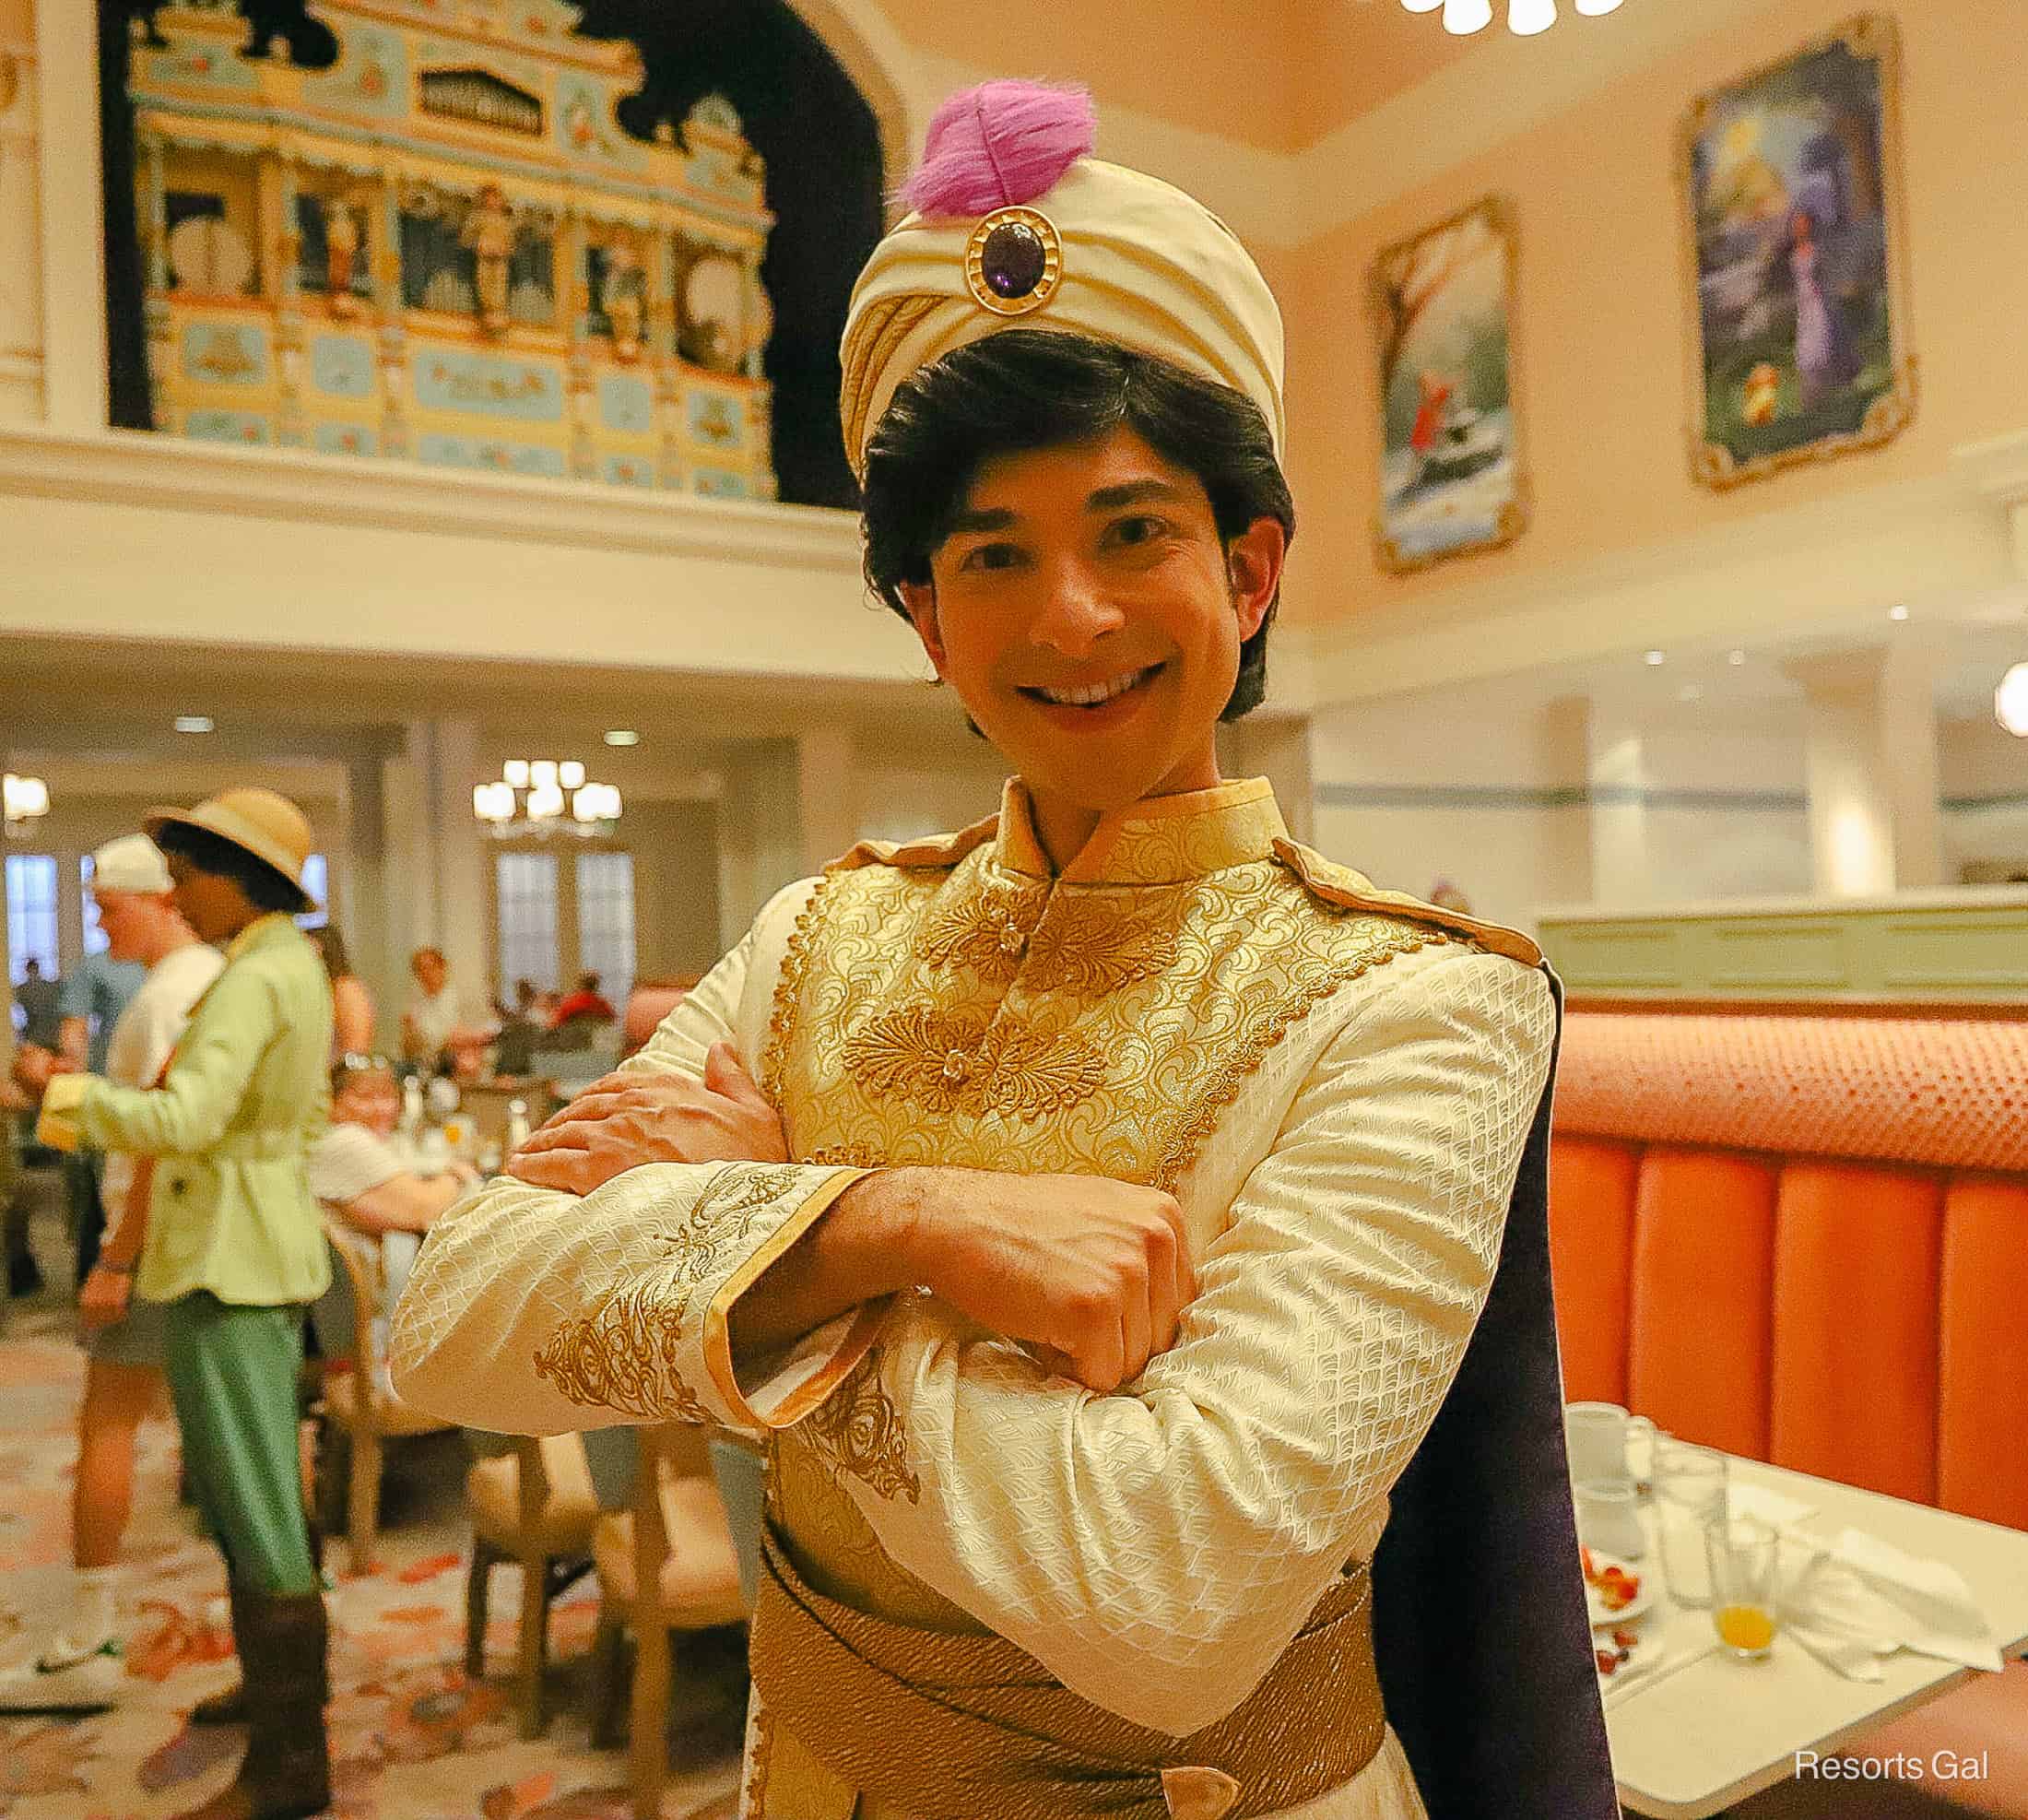 Aladdin as Prince Ali at 1900 Park Fare Character Breakfast at Disney's Grand Floridian 